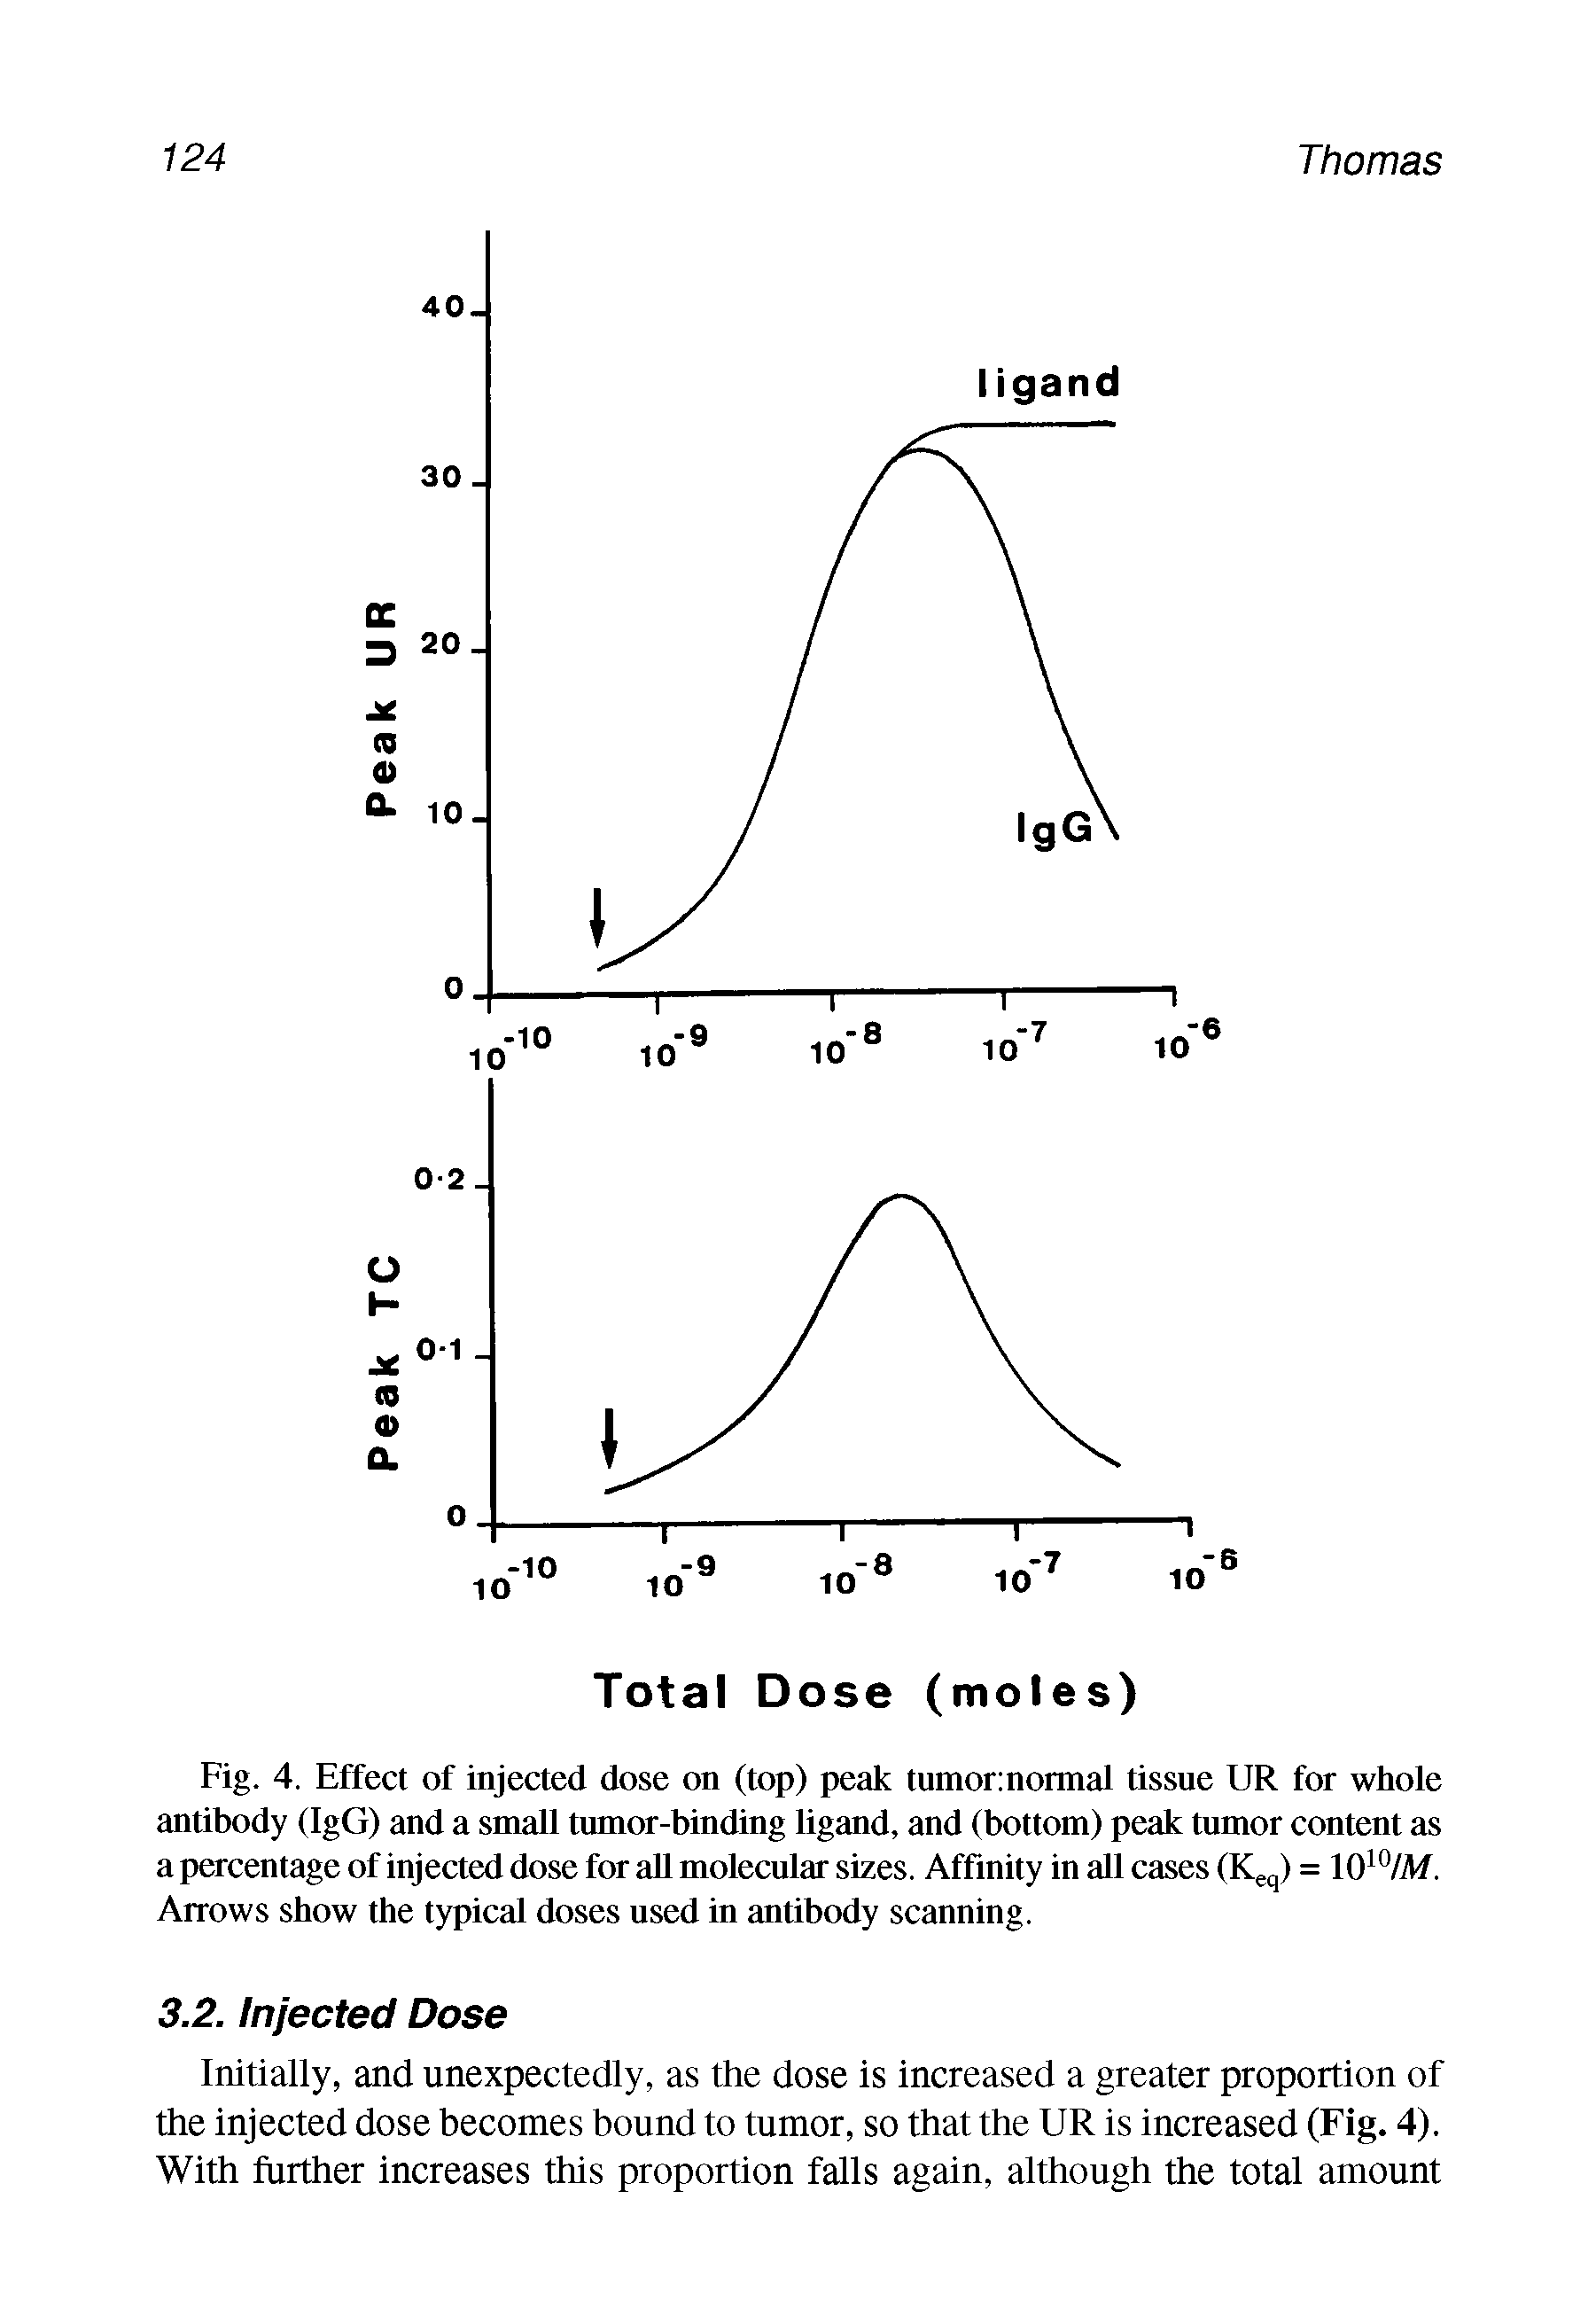 Fig. 4. Effect of injected dose on (top) peak tumor normal tissue UR for whole antibody (IgG) and a small tumor-binding ligand, and (bottom) peak tumor content as a percentage of injected dose for all molecular sizes. Affinity in all cases (Keq) = 1010/M. Arrows show the typical doses used in antibody scanning.